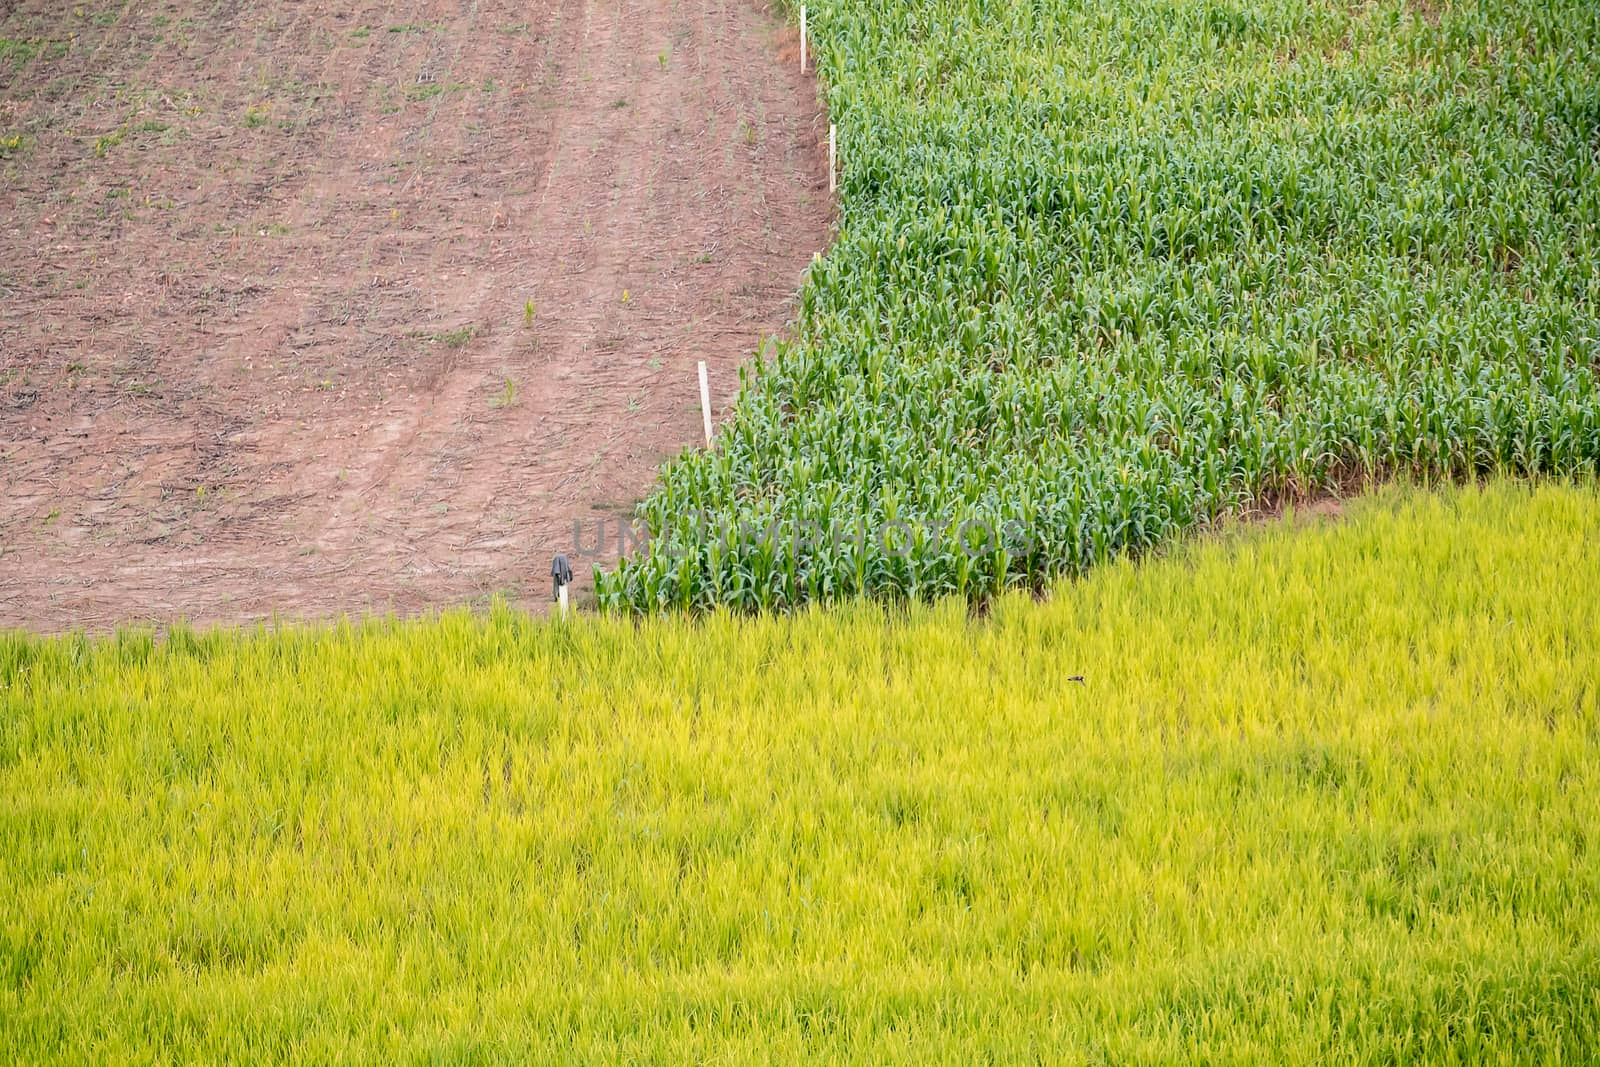 3 different crops filed,corn, rice